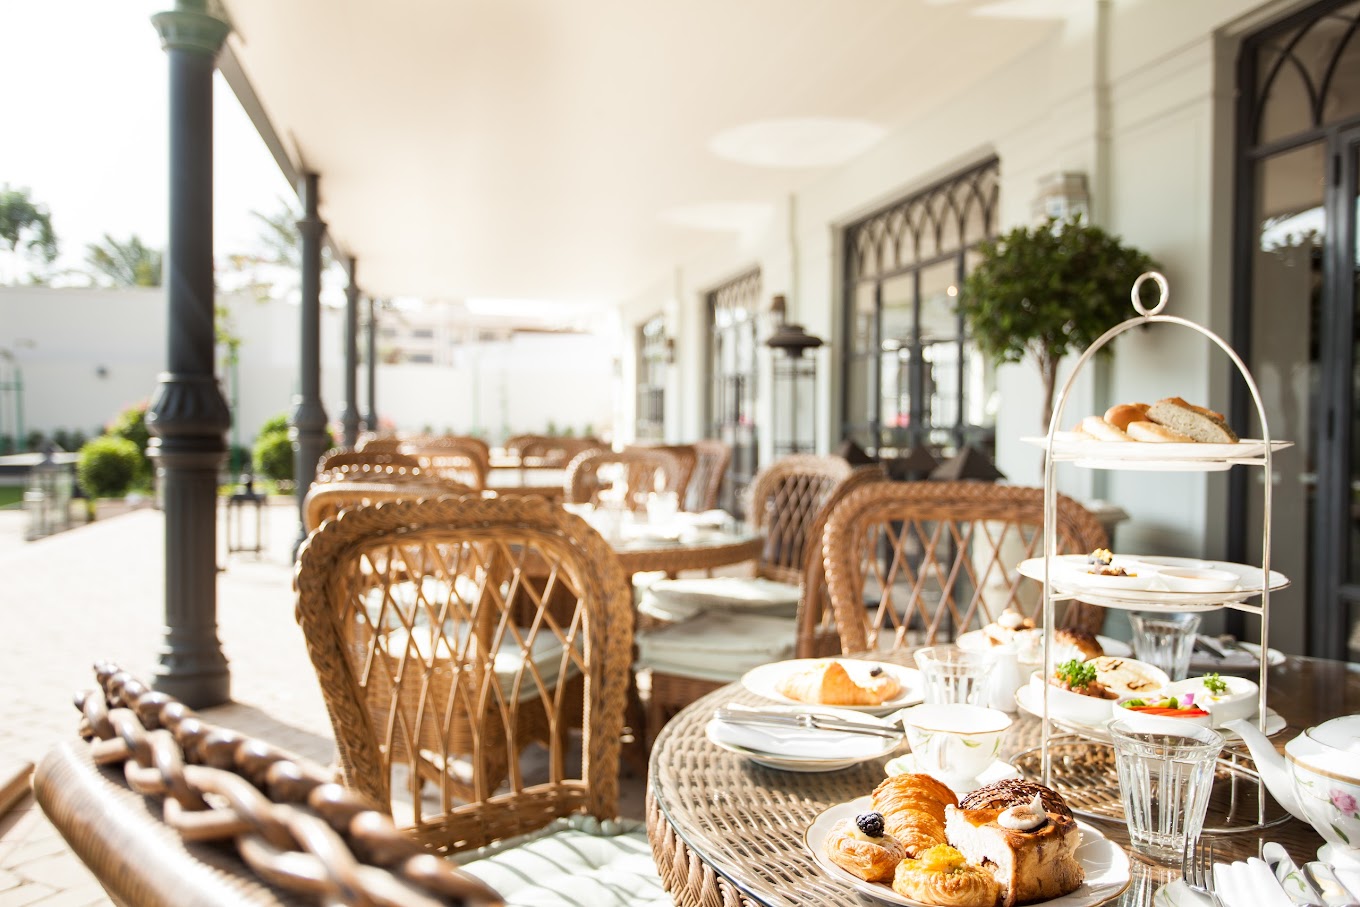 the orangery: afternoon tea in bahrain